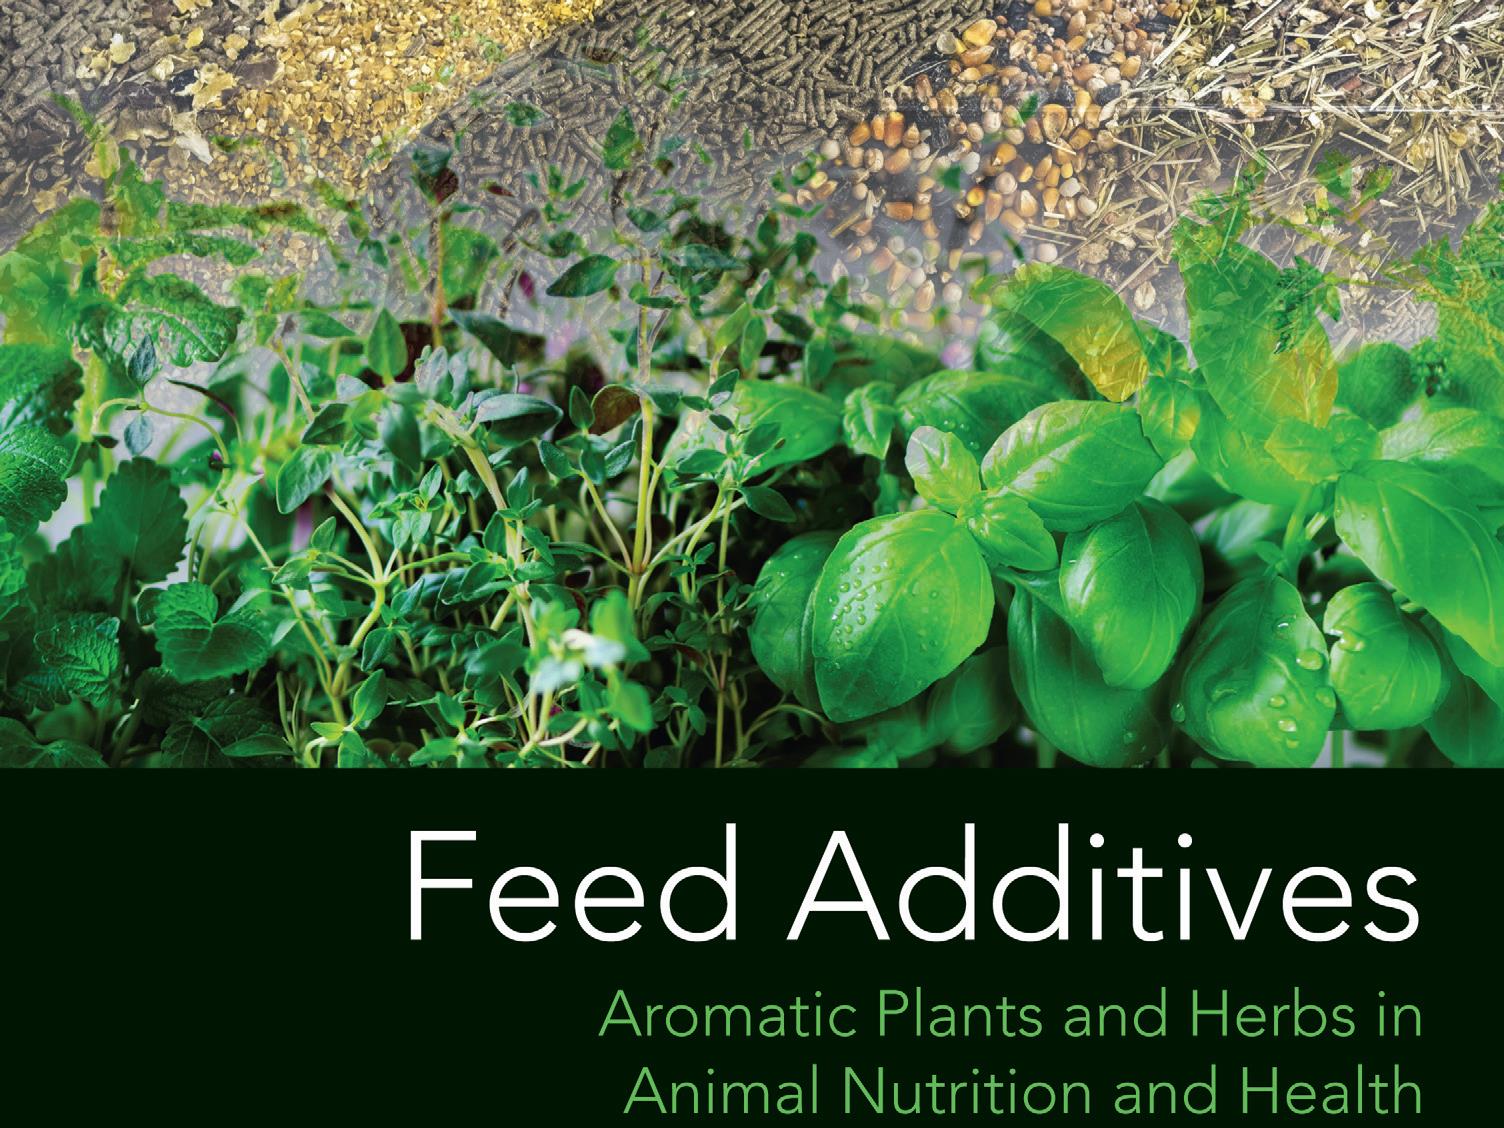 Feed Additives: Aromatic Plants and Herbs in Animal Nutrition and Health
